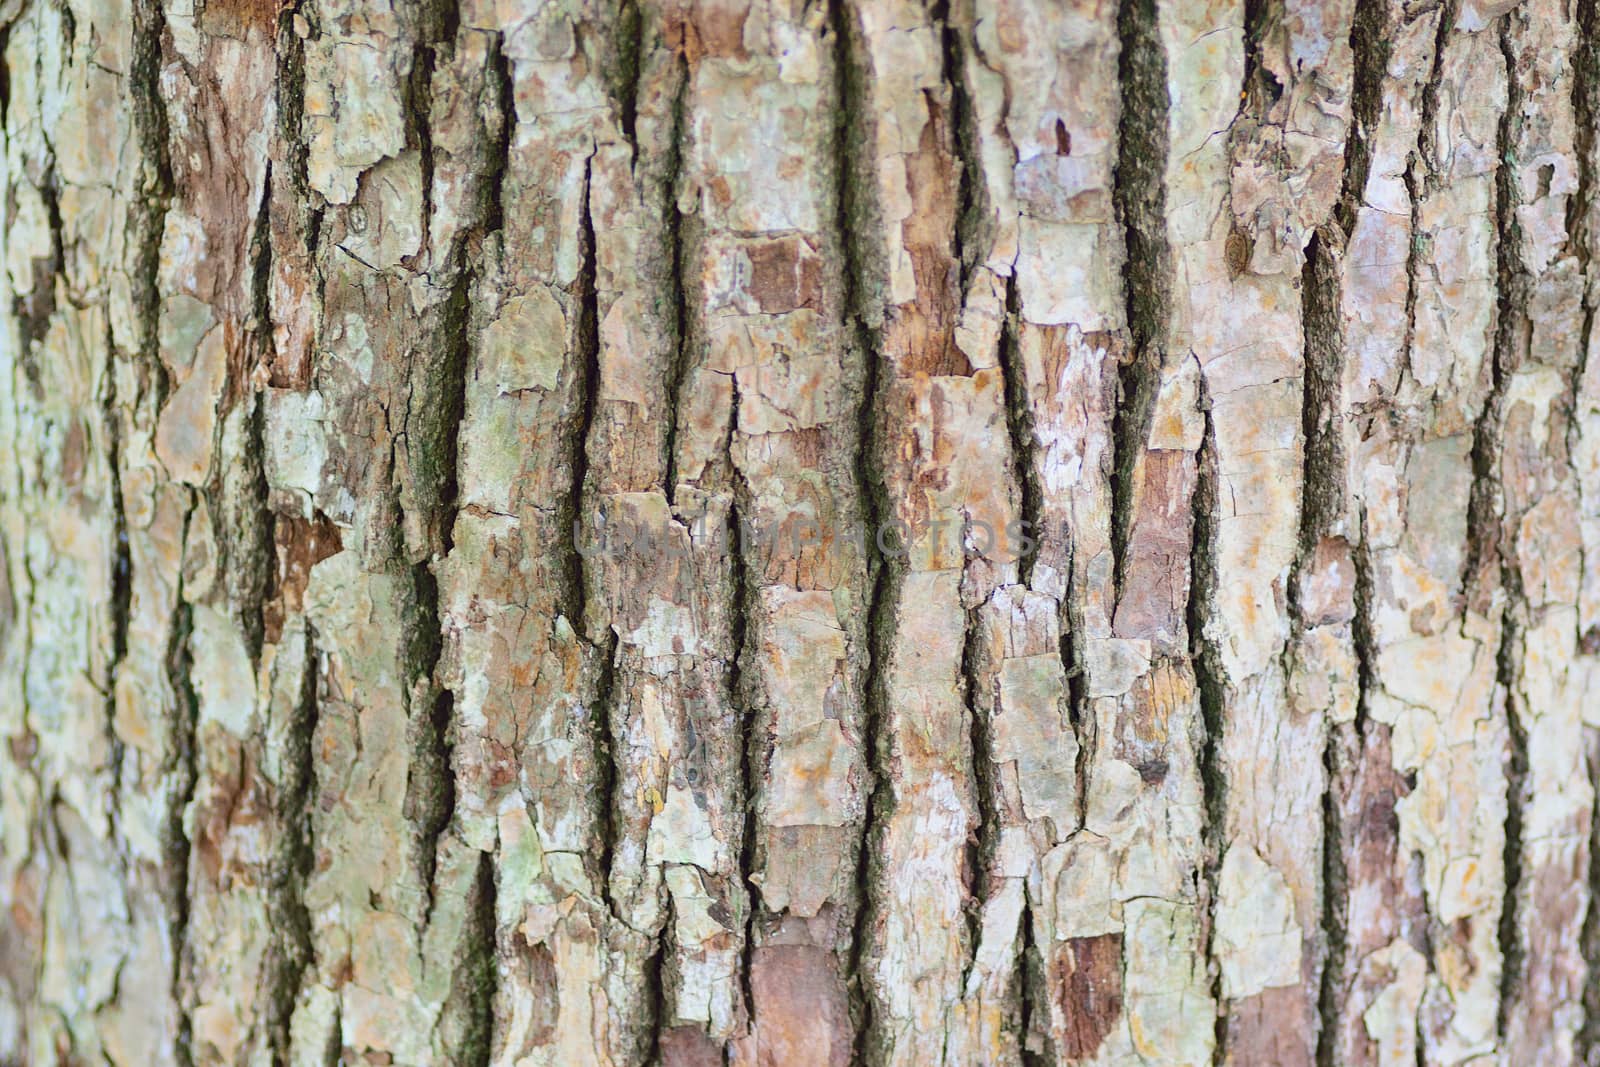 Texture of old wooden tree trunk in horizontal frame